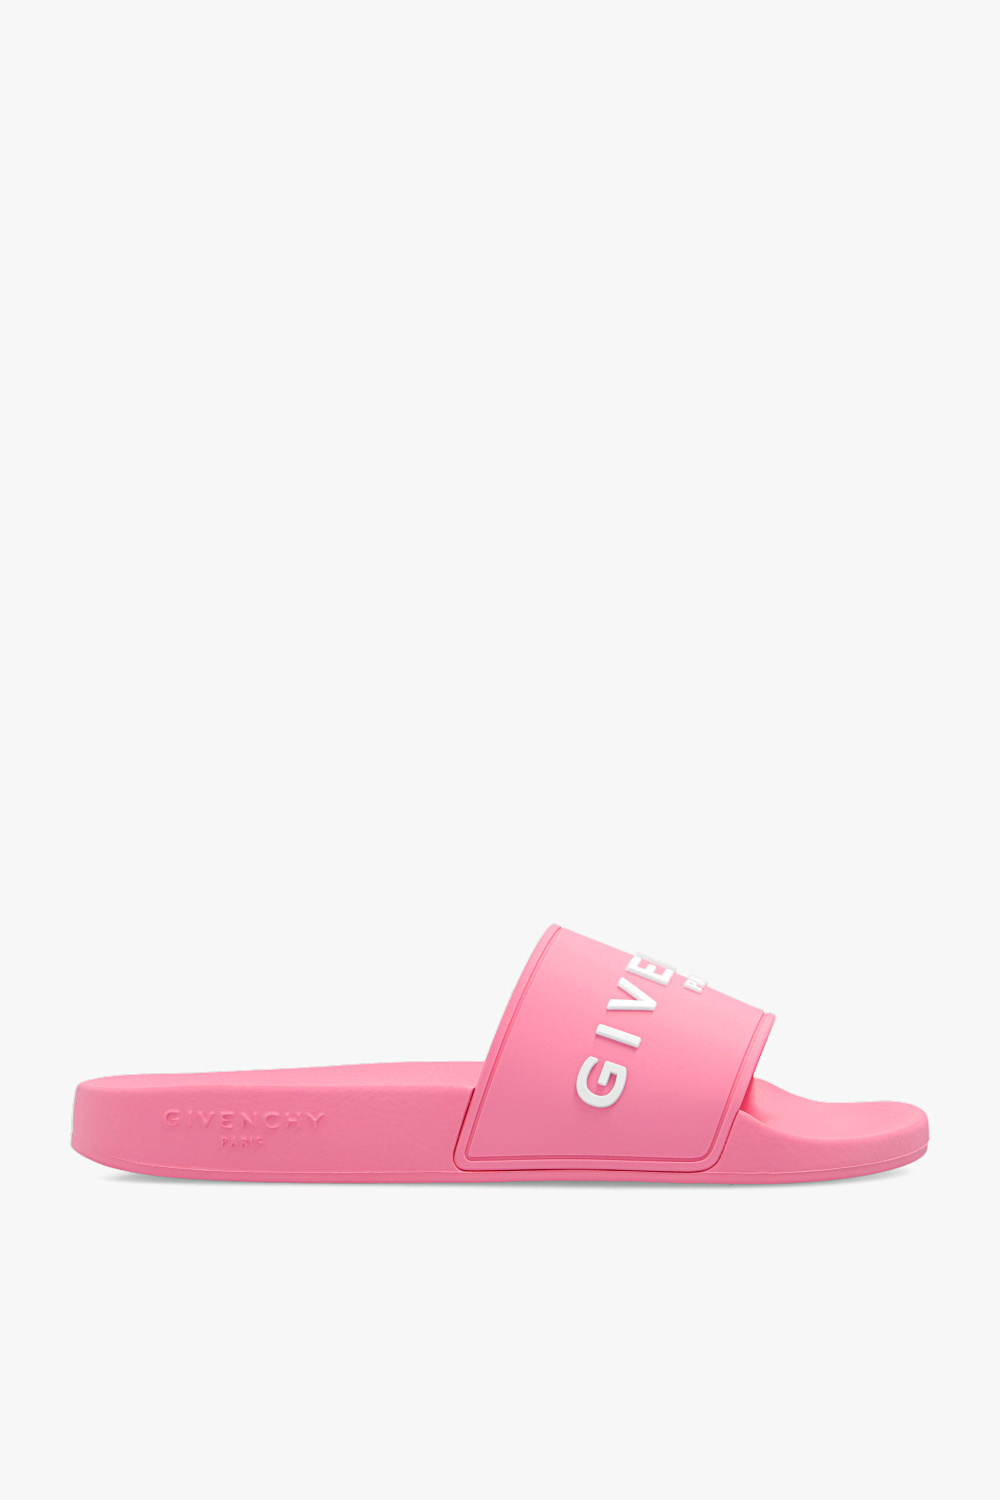 Givenchy Slides with logo | Women's Shoes | Vitkac